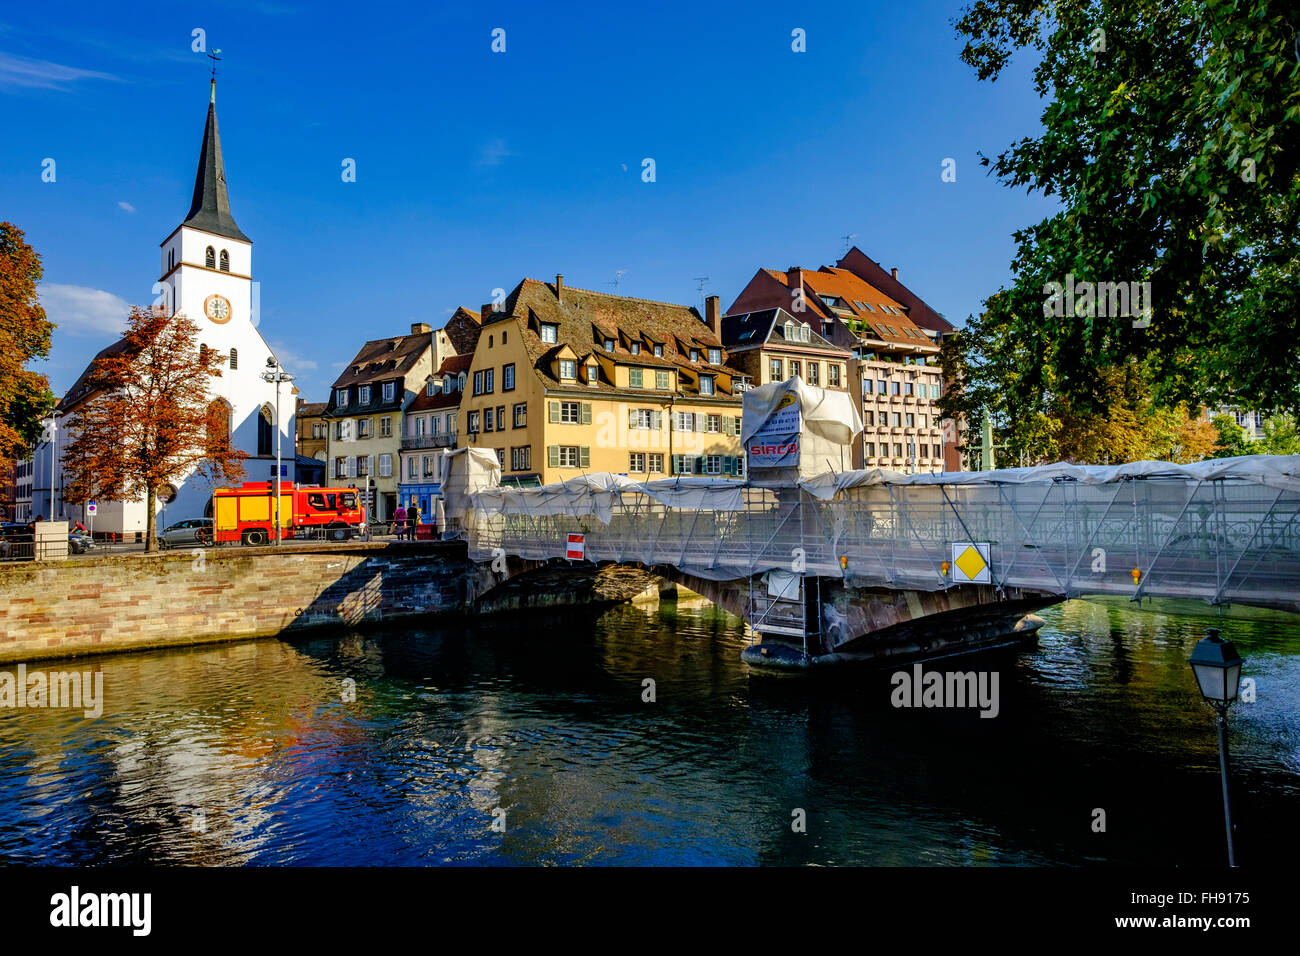 St Guillaume church and bridge renovation, Strasbourg, Alsace, France, Europe Stock Photo